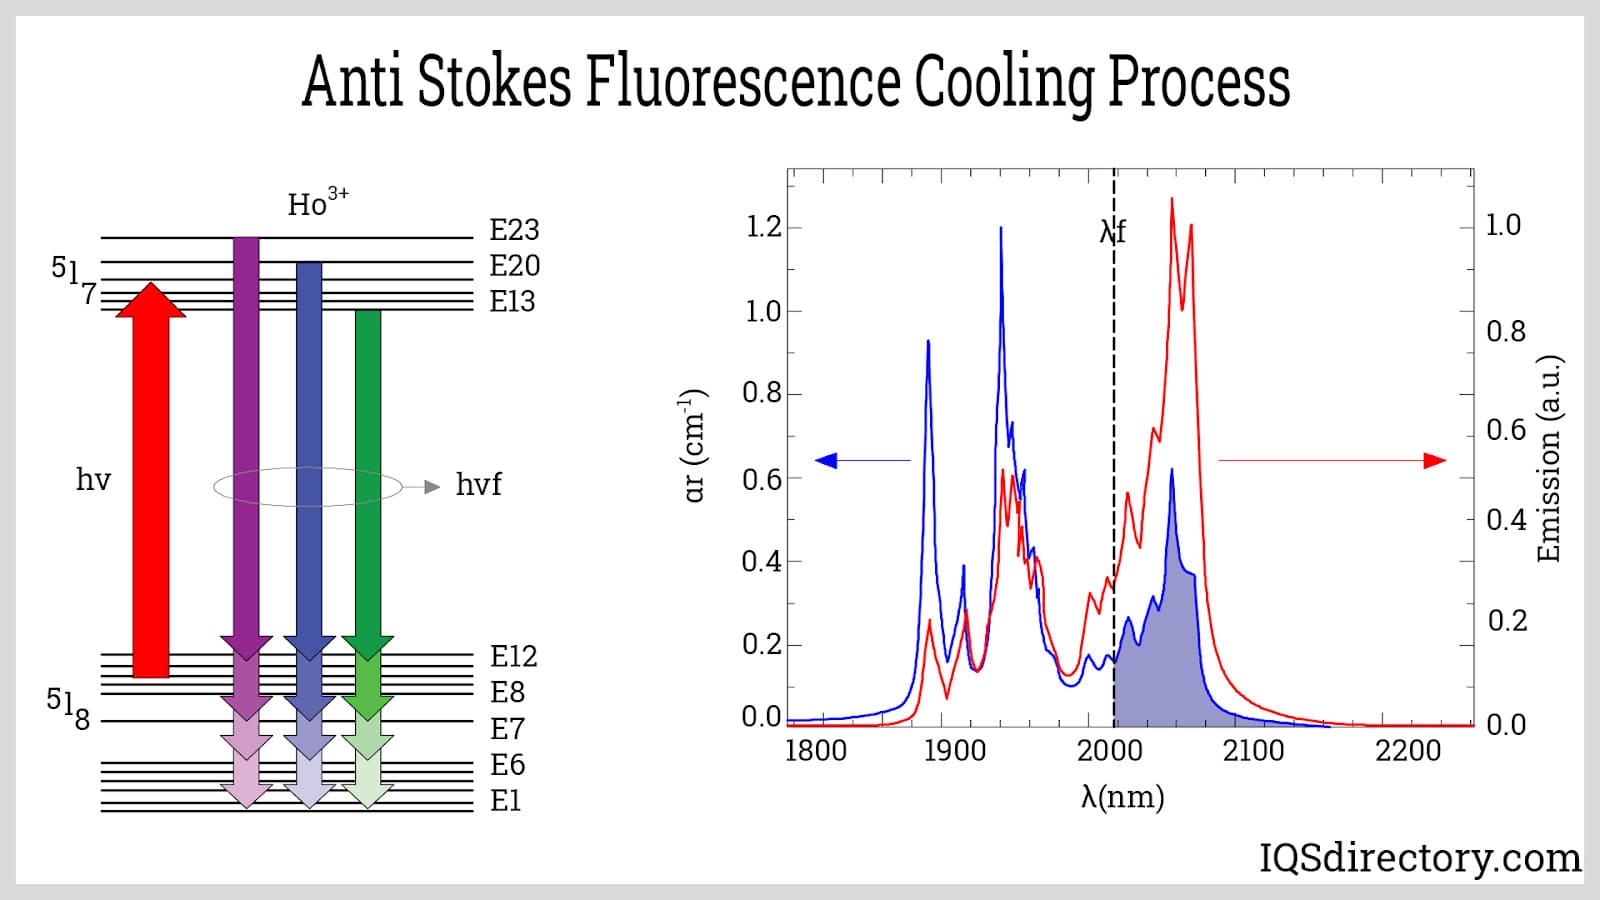 Anti Stokes Fluorescence Cooling Process